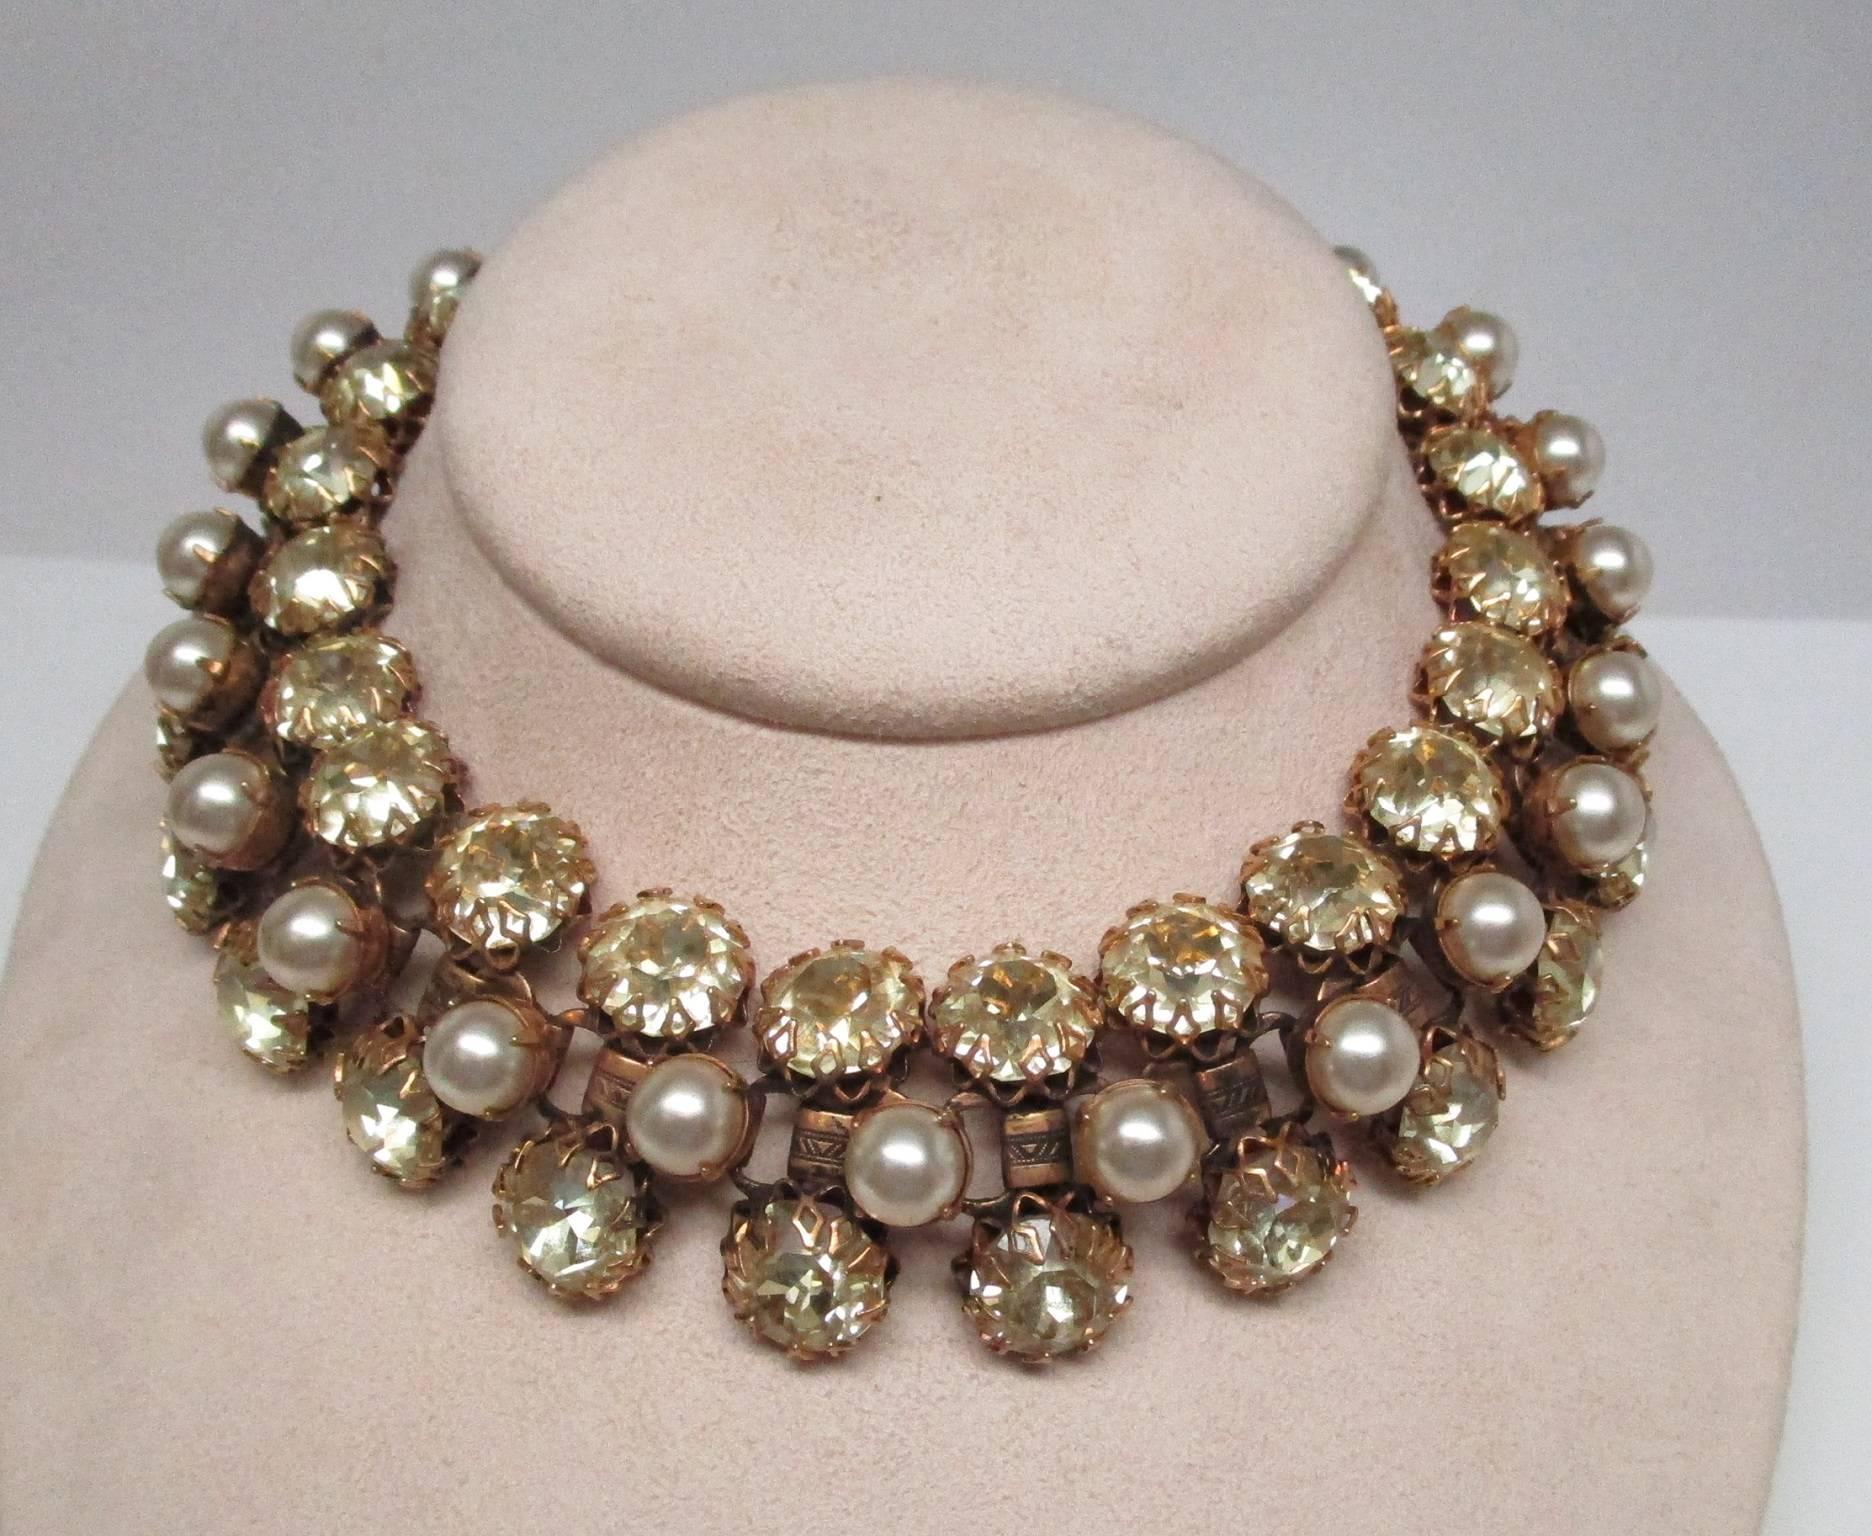 This is a fantastic, big, bold beautiful Deco rhinestone and faux pearl choker necklace by Schreiner of New York. It is bright and flashy, giving you an eye catching look without the worries a necklace of this caliber with genuine gems would. This